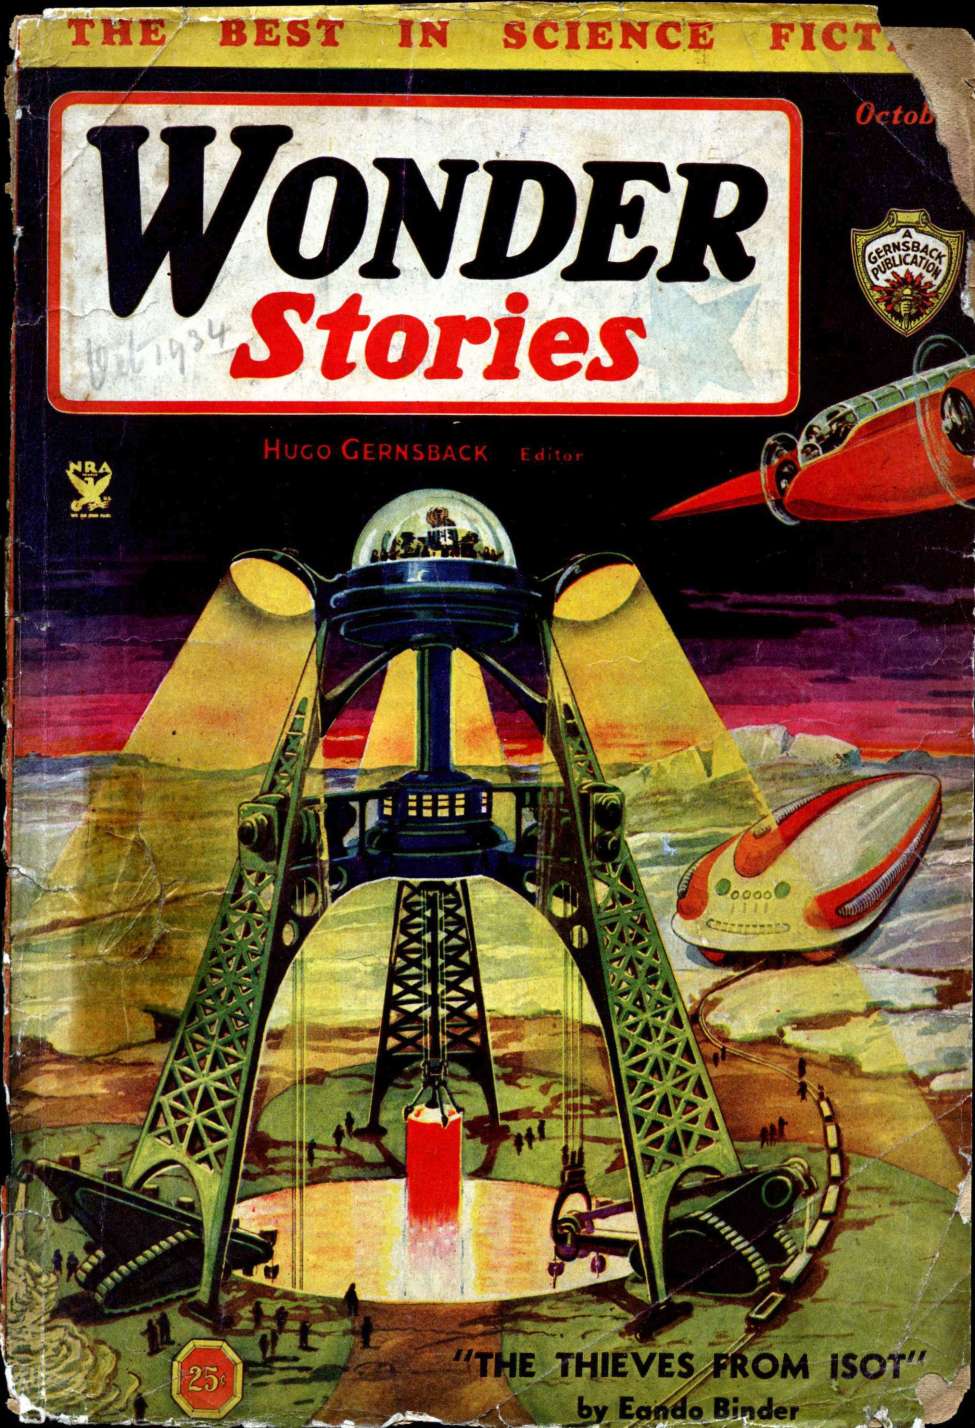 Comic Book Cover For Wonder Stories v6 5 - The Thieves from Isot - Eando Binder